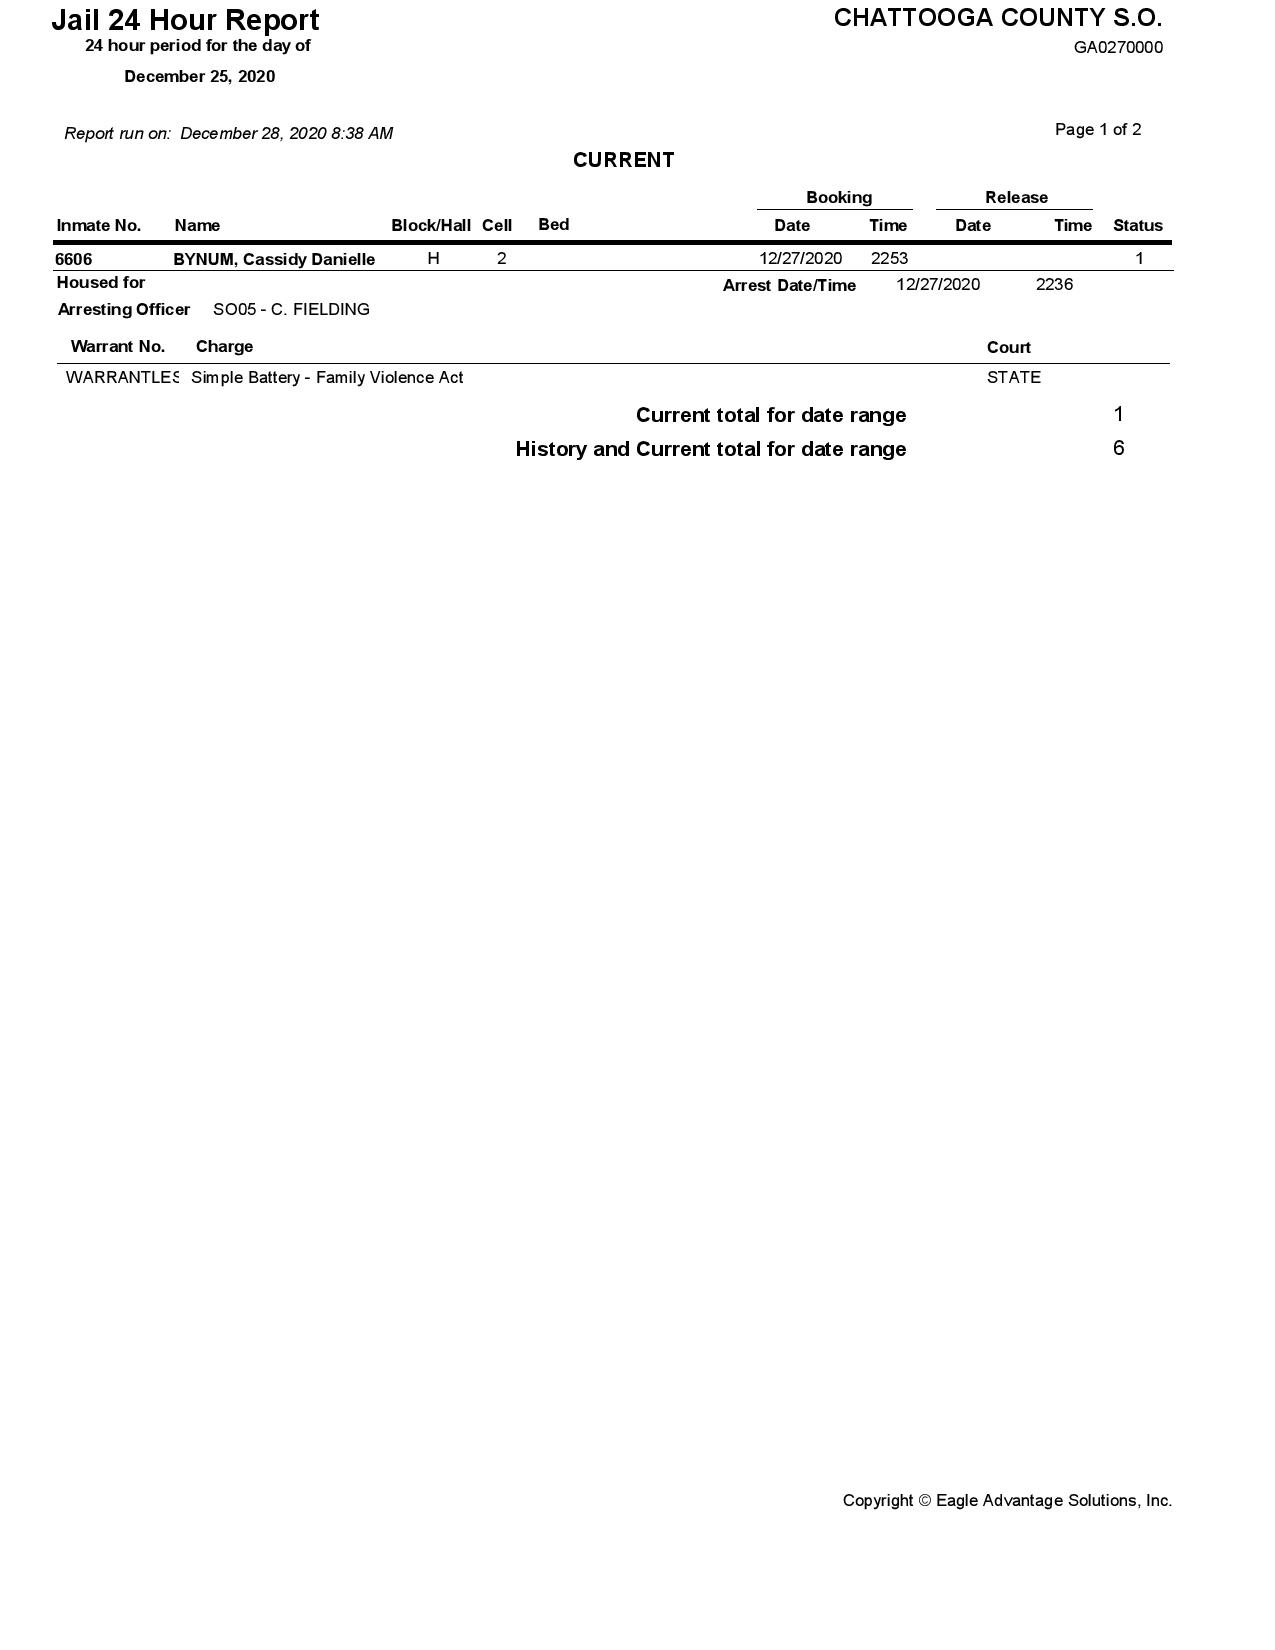 chattooga jail24 hour 12.28.2-page-001